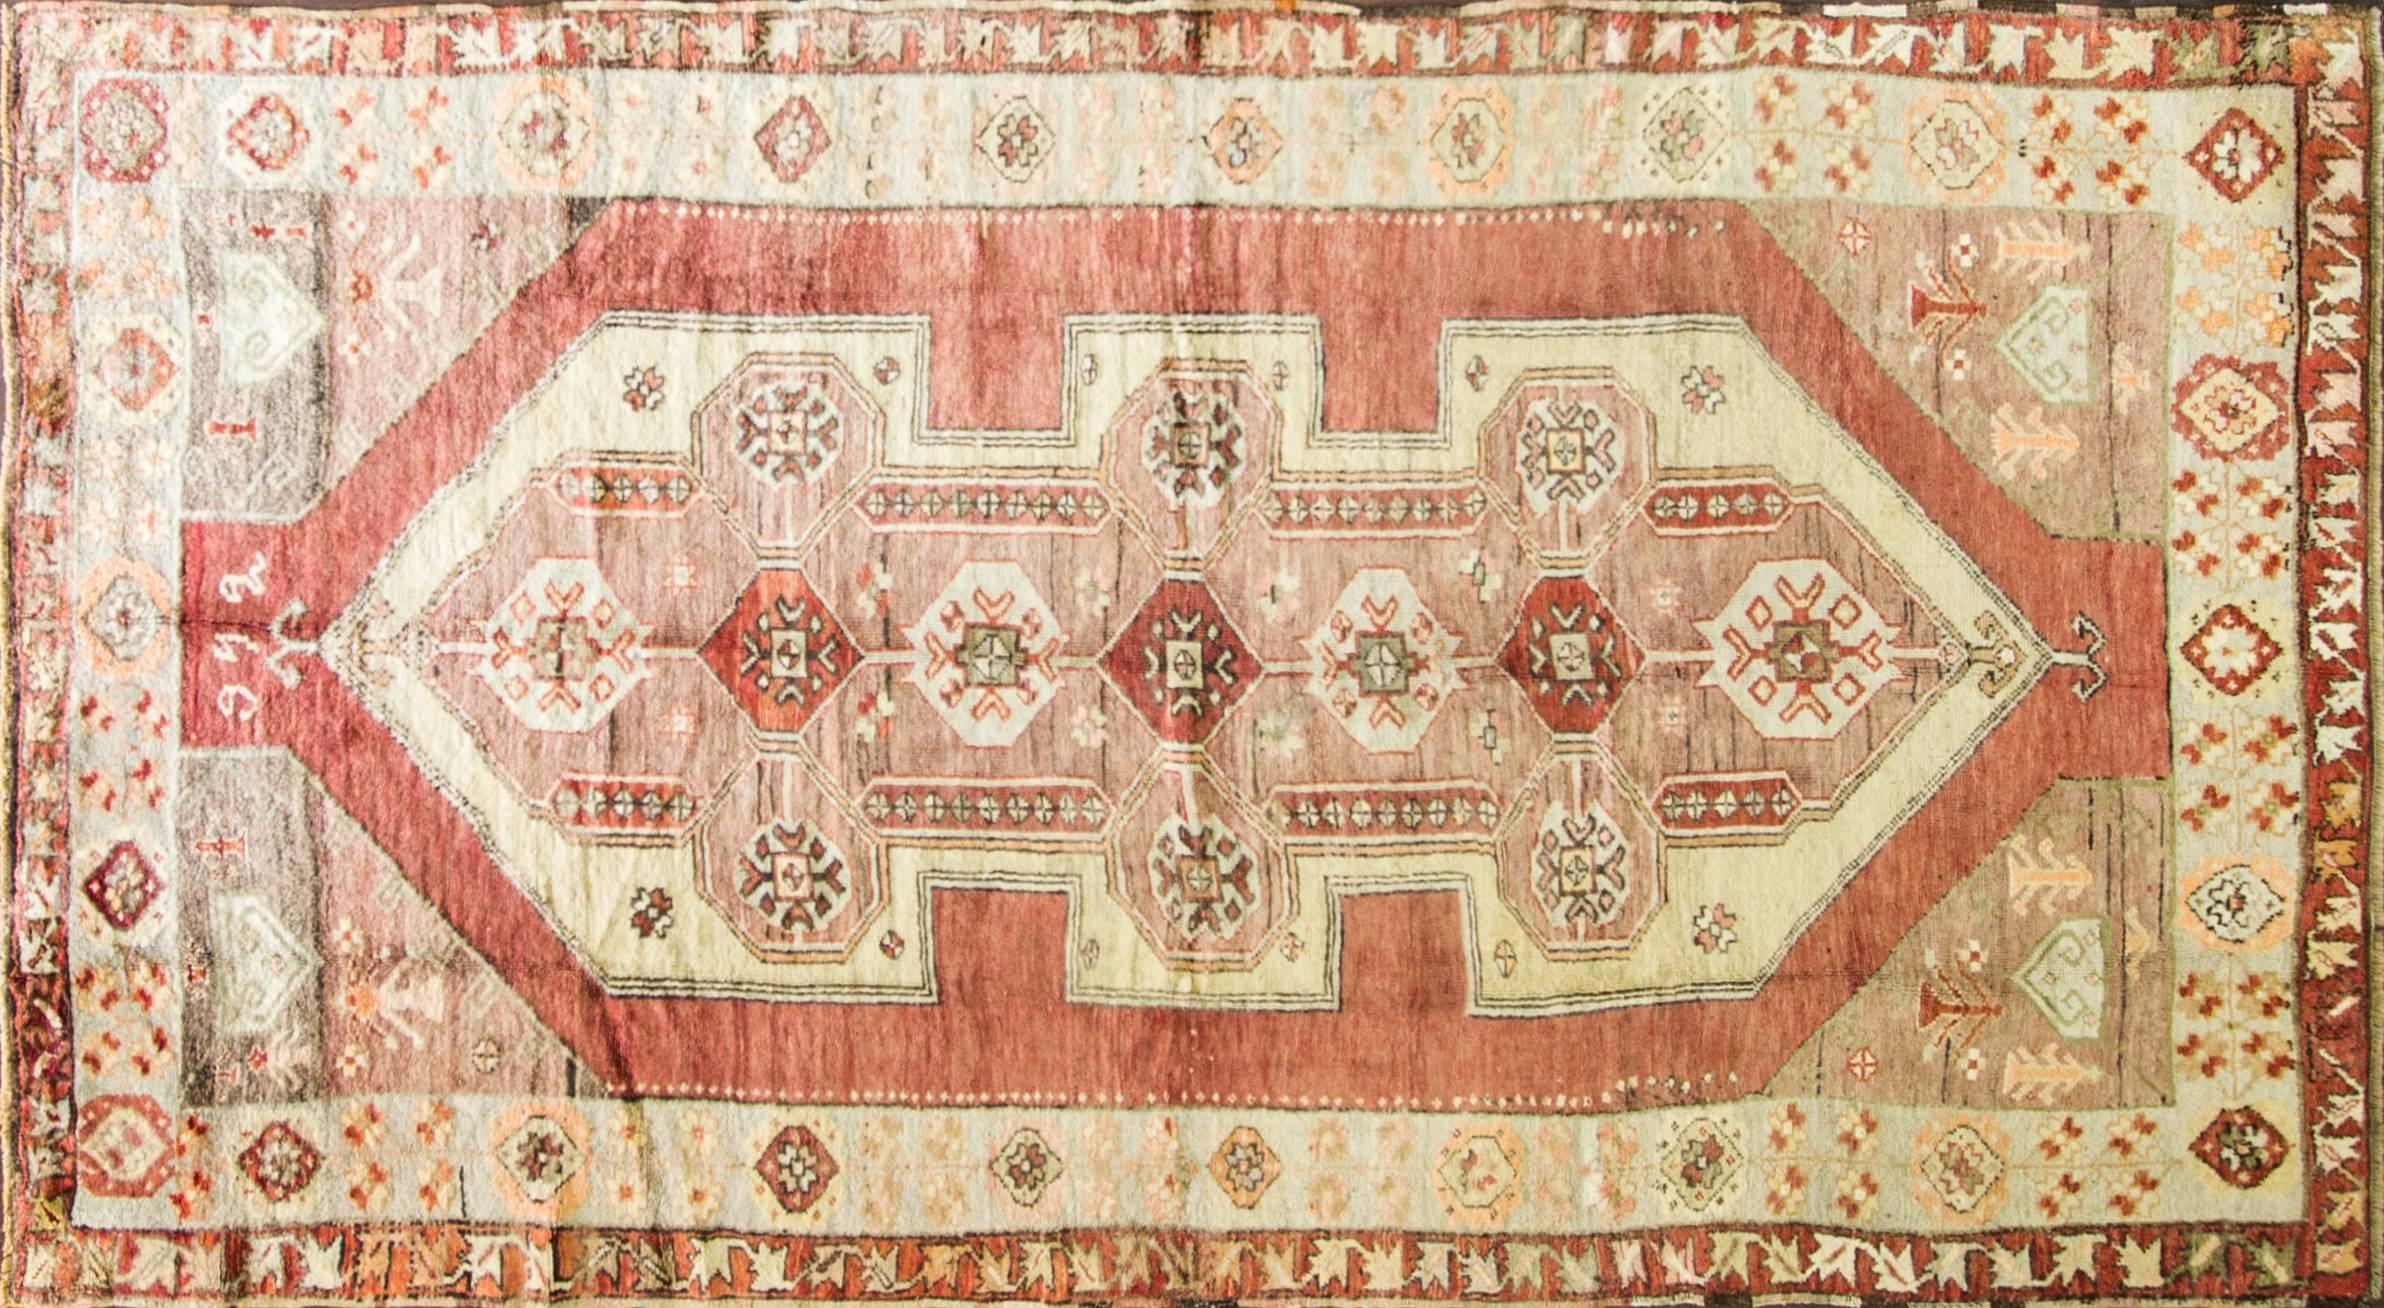 Oushak rugs have been in production since the 15th century with superb wools and natural dyes. Unlike other Turkish rugs, Oushak rugs influenced after Persian rugs and the woven with Ghiordies knots and all double knotted, their design is feature